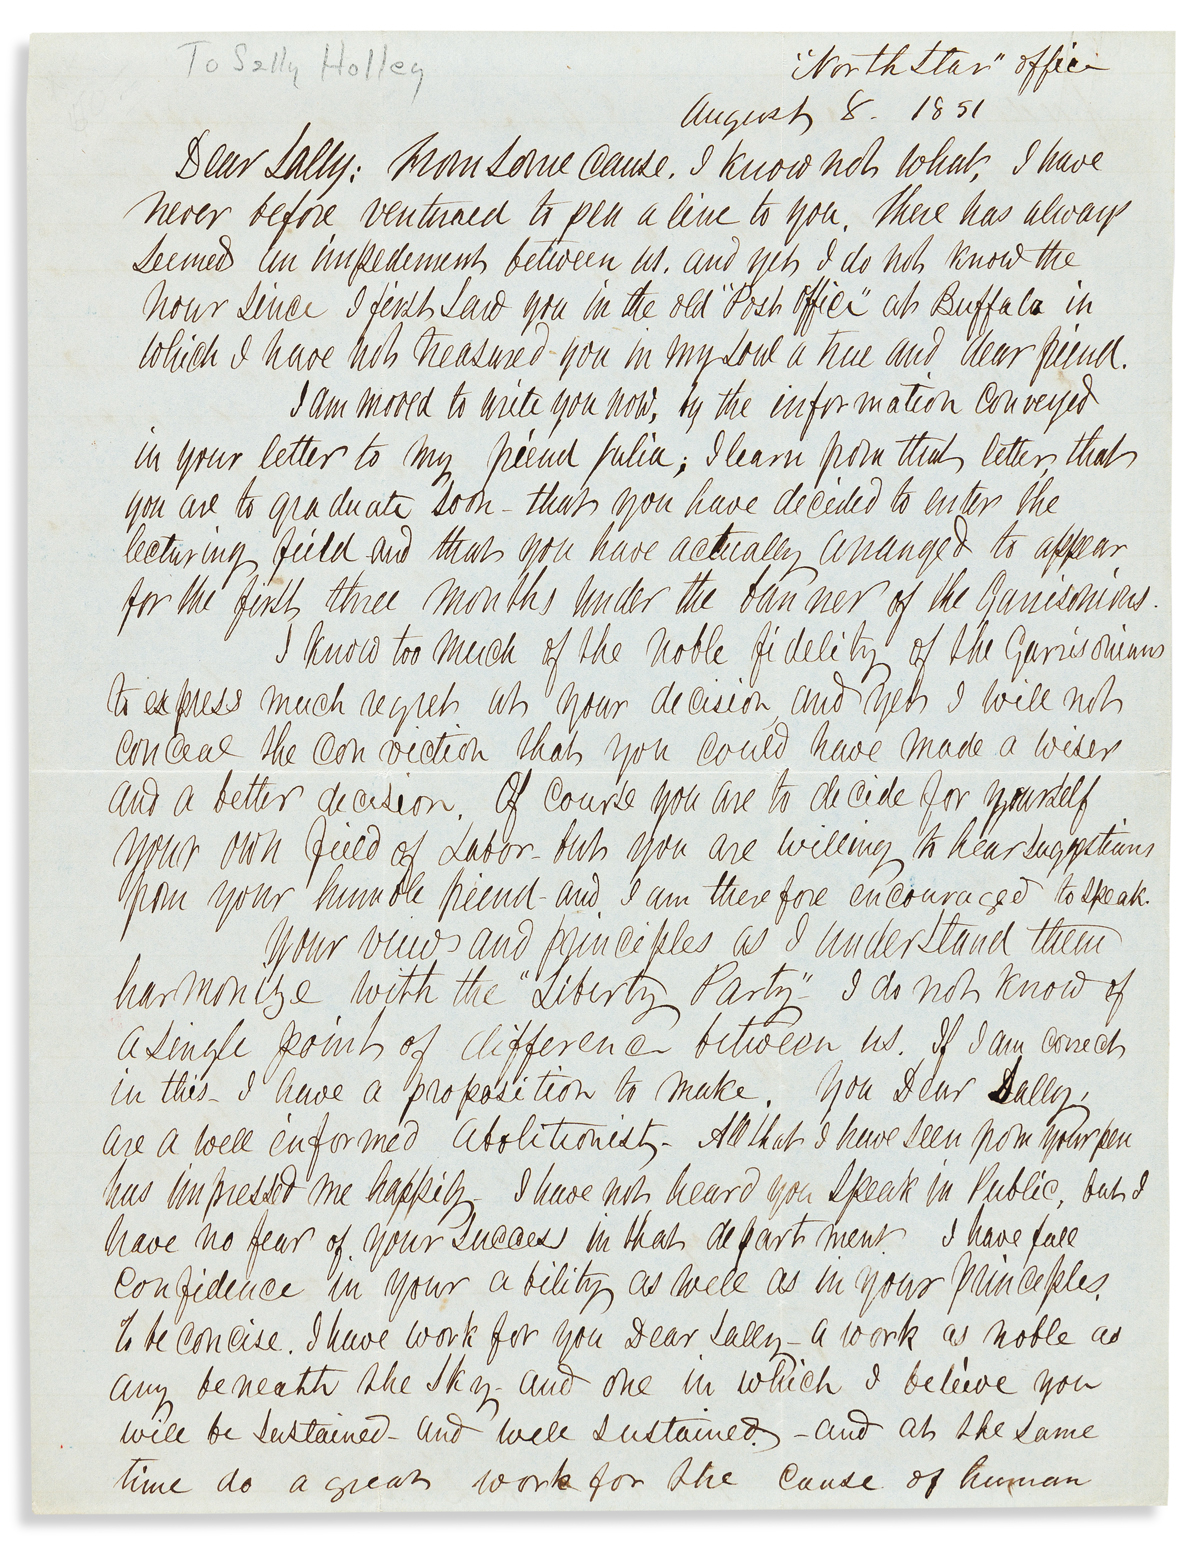 DOUGLASS, FREDERICK. Autograph Letter Signed, to Sallie Holley (Dear Sally),